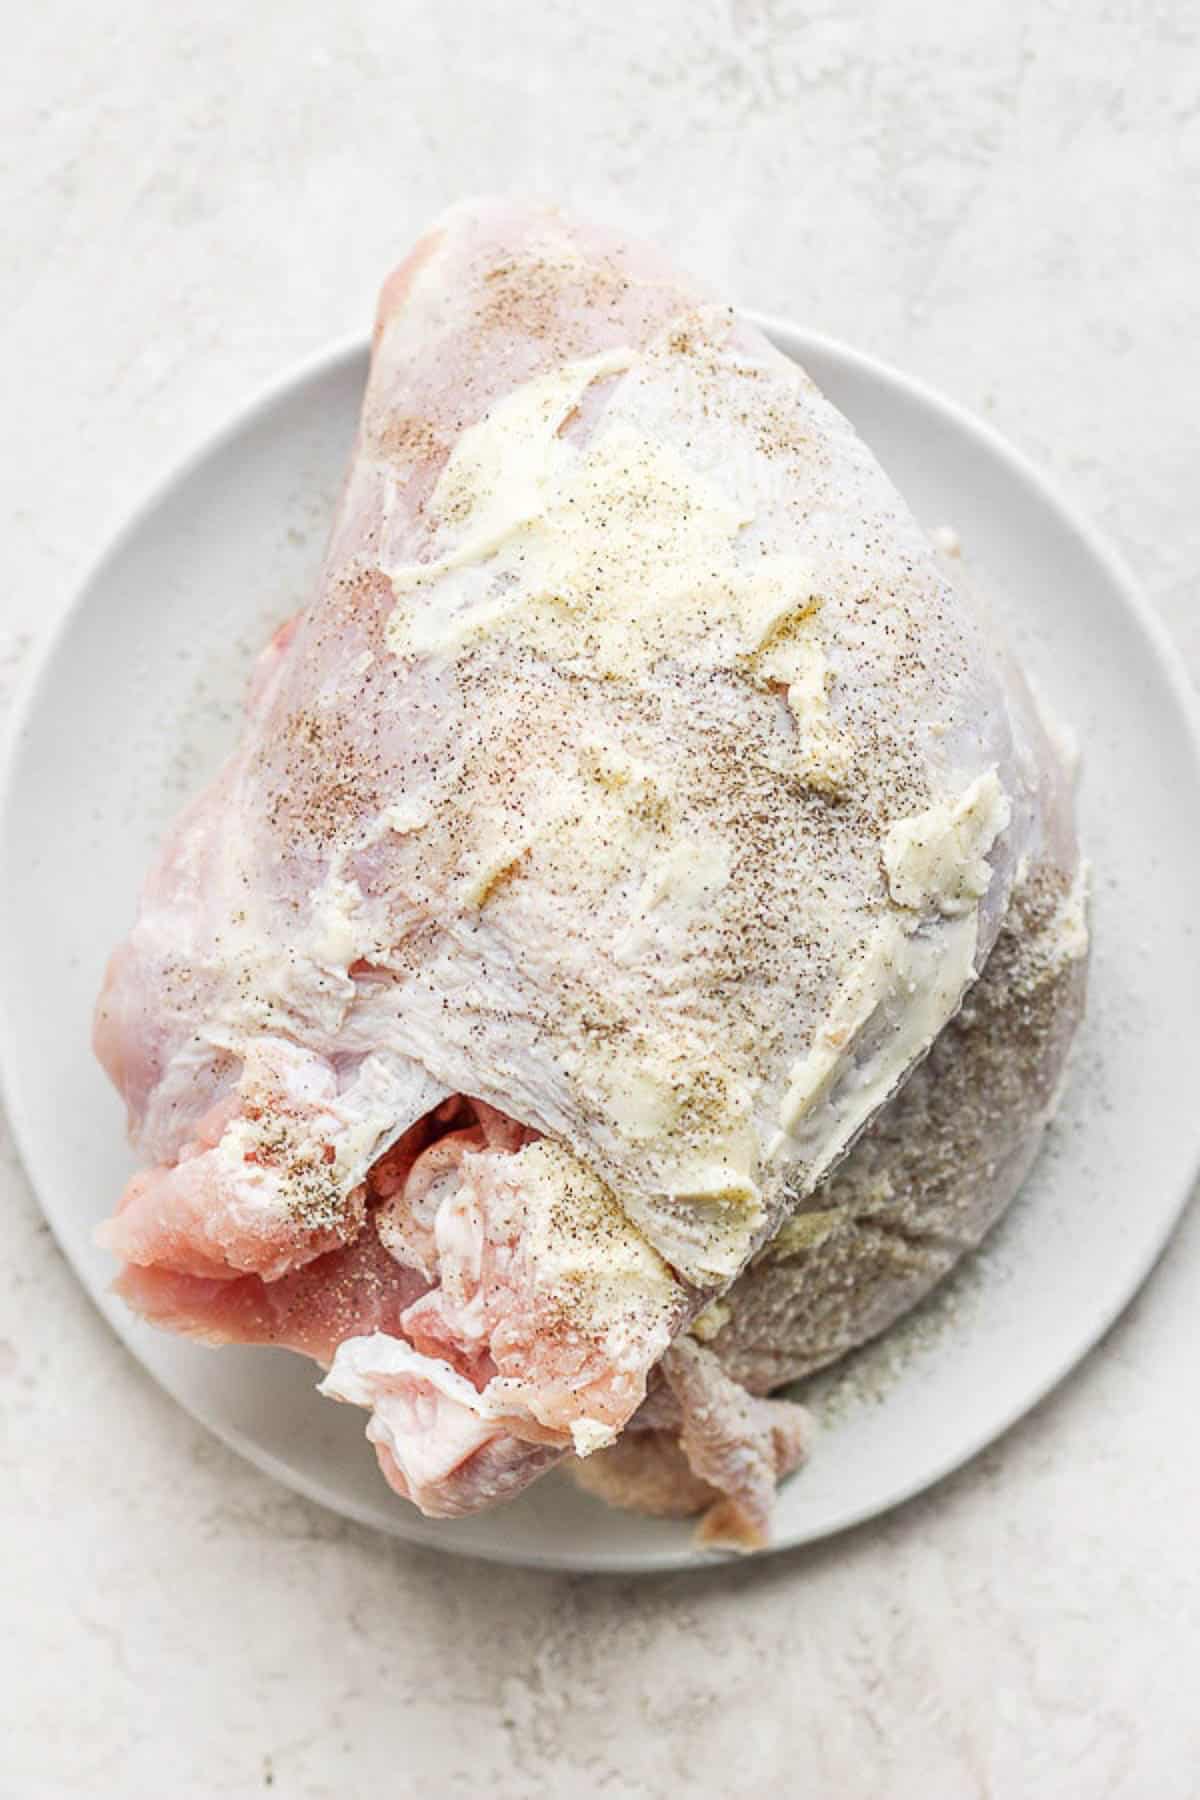 A turkey breast covered in softened butter and seasoning and ready for the smoker.